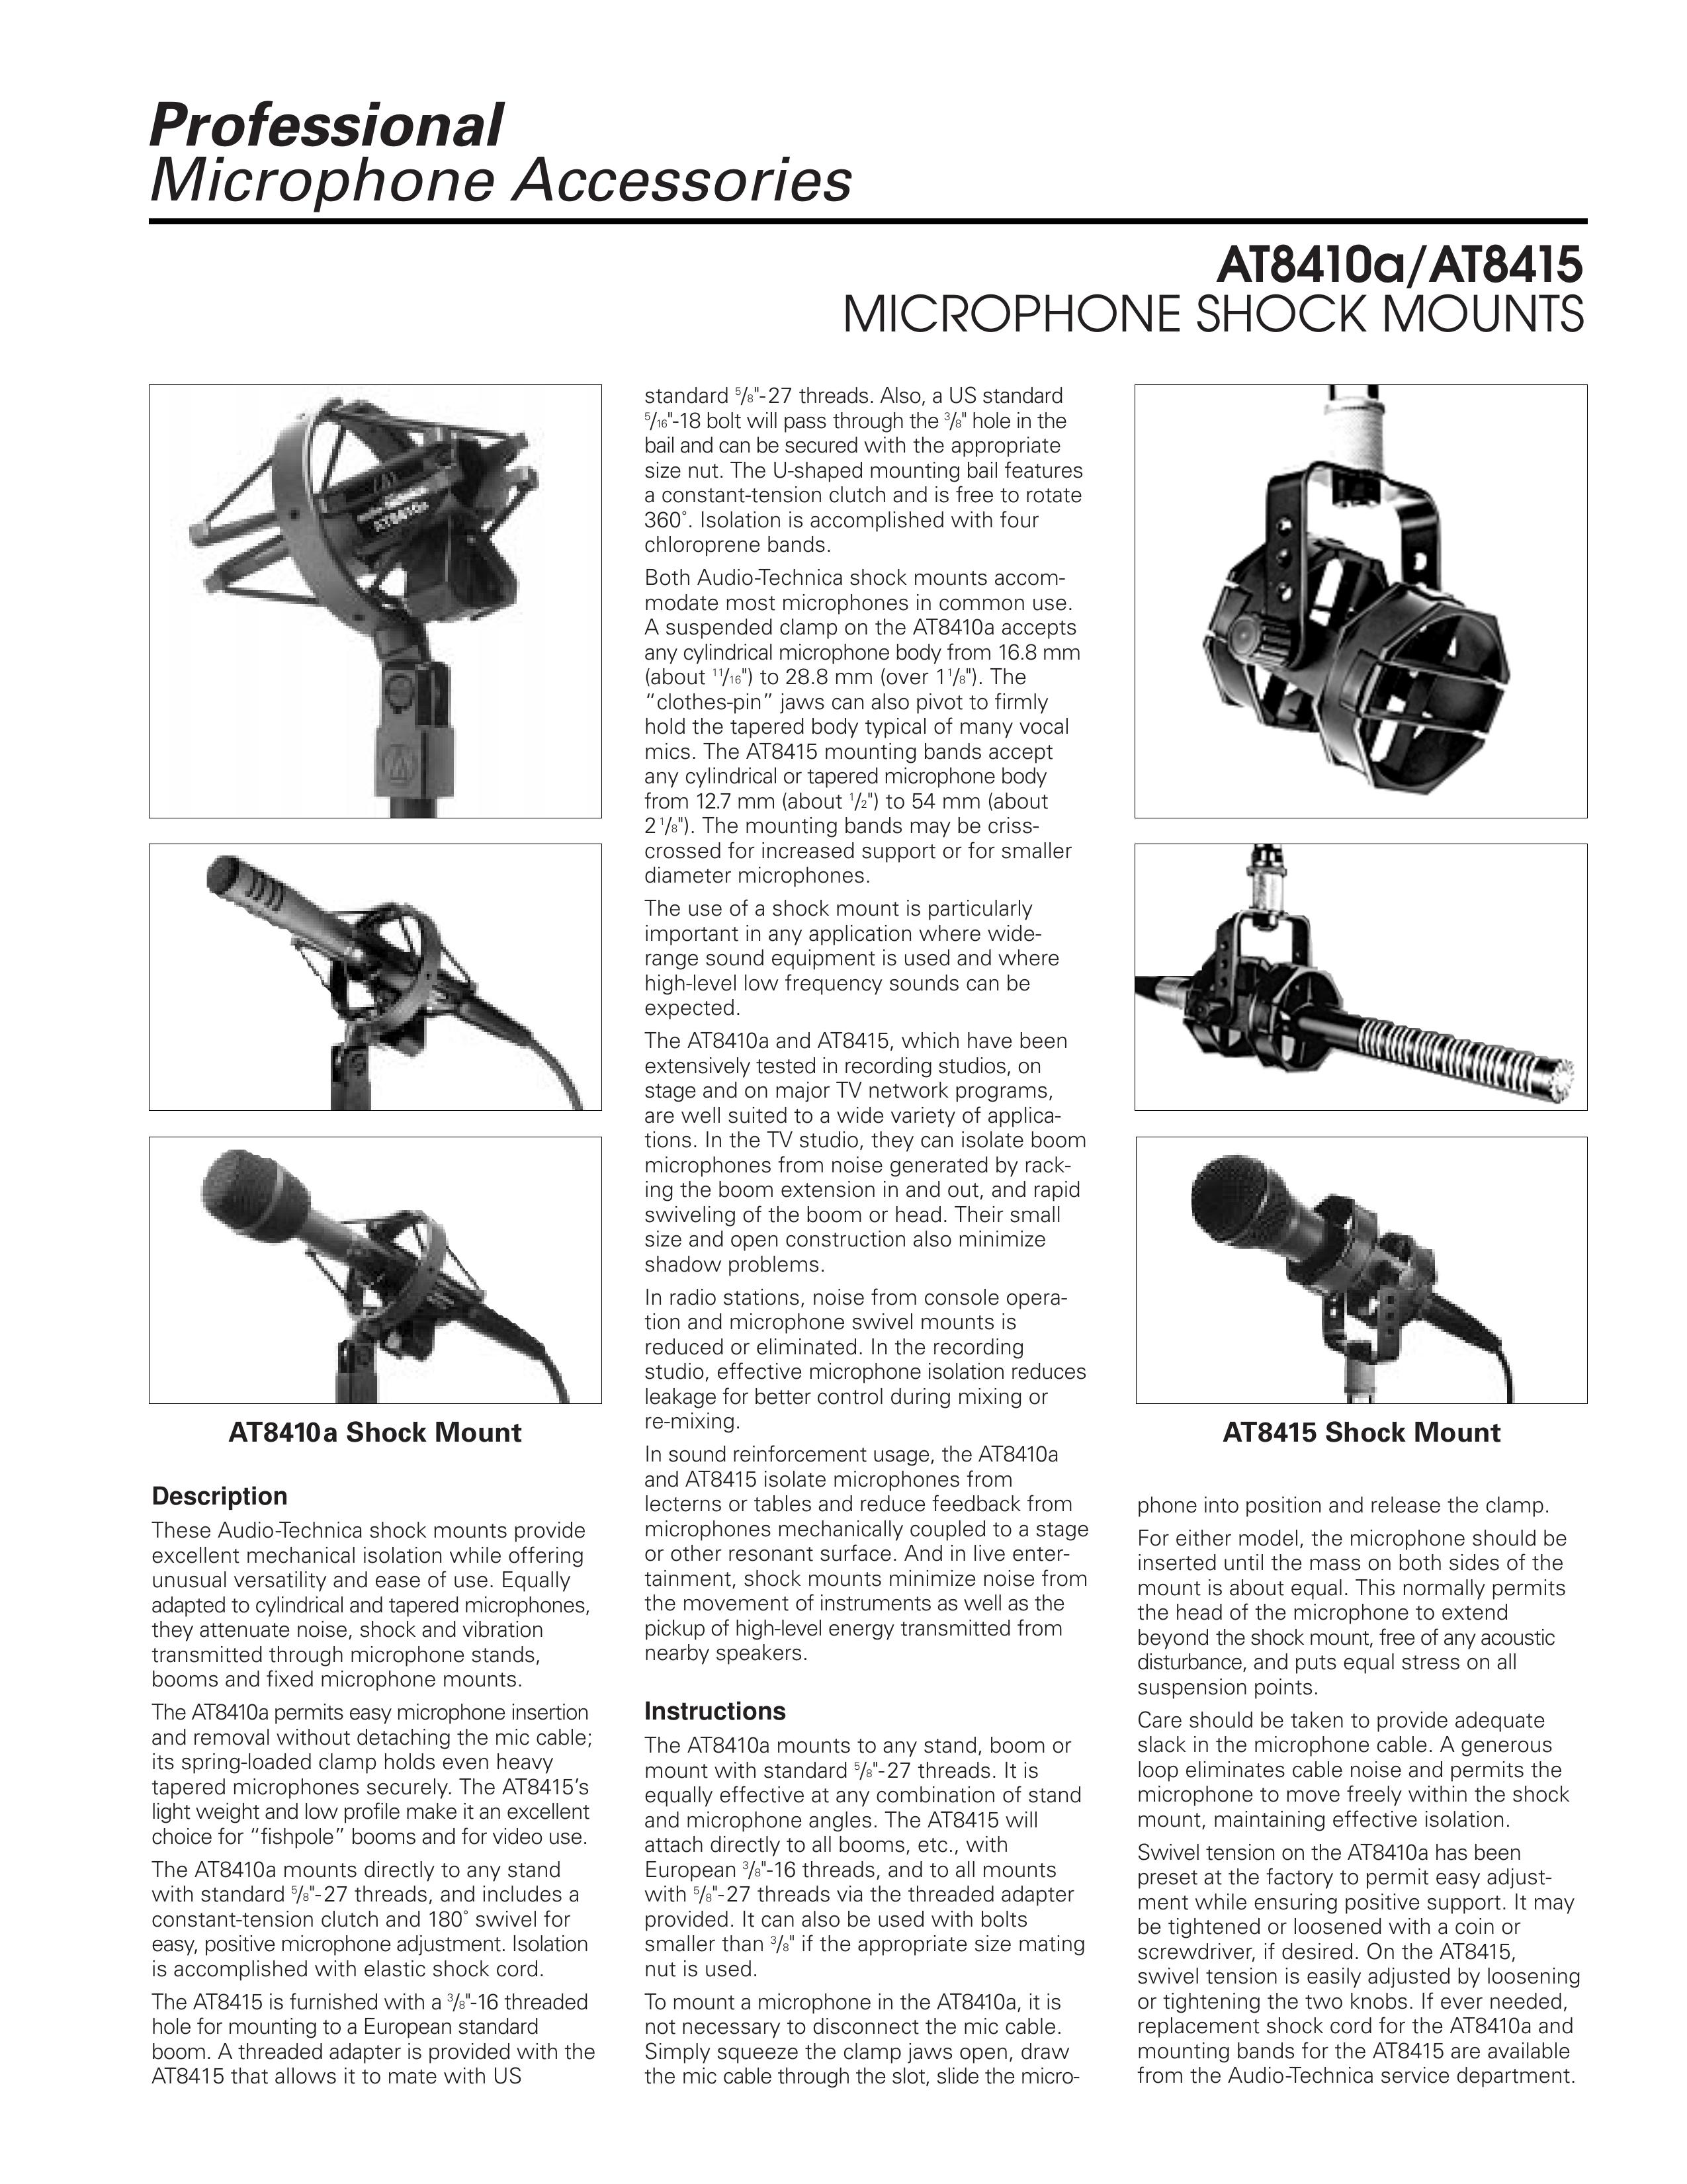 Audio-Technica AT8410a Microphone User Manual